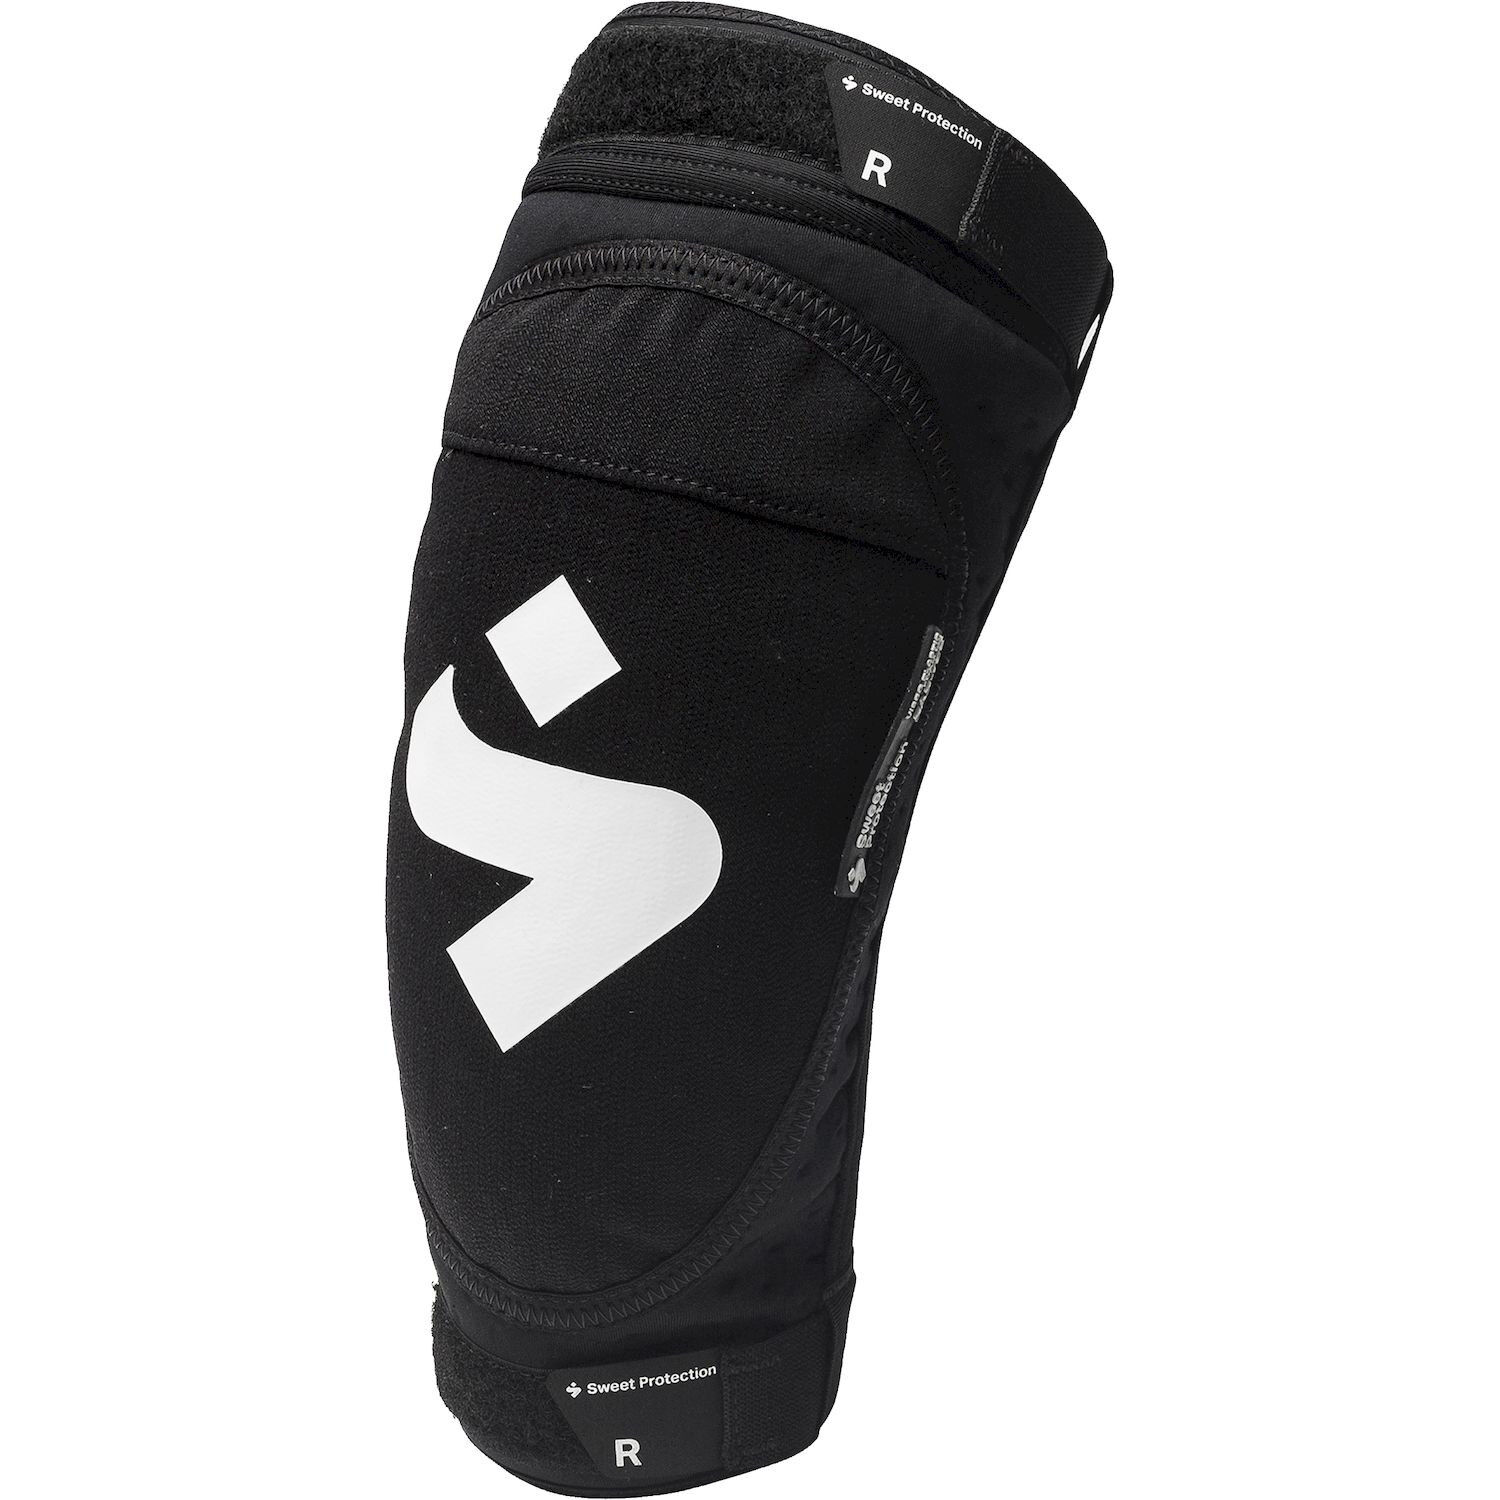 Sweet Protection Elbow Pads - Albuebeskyttere